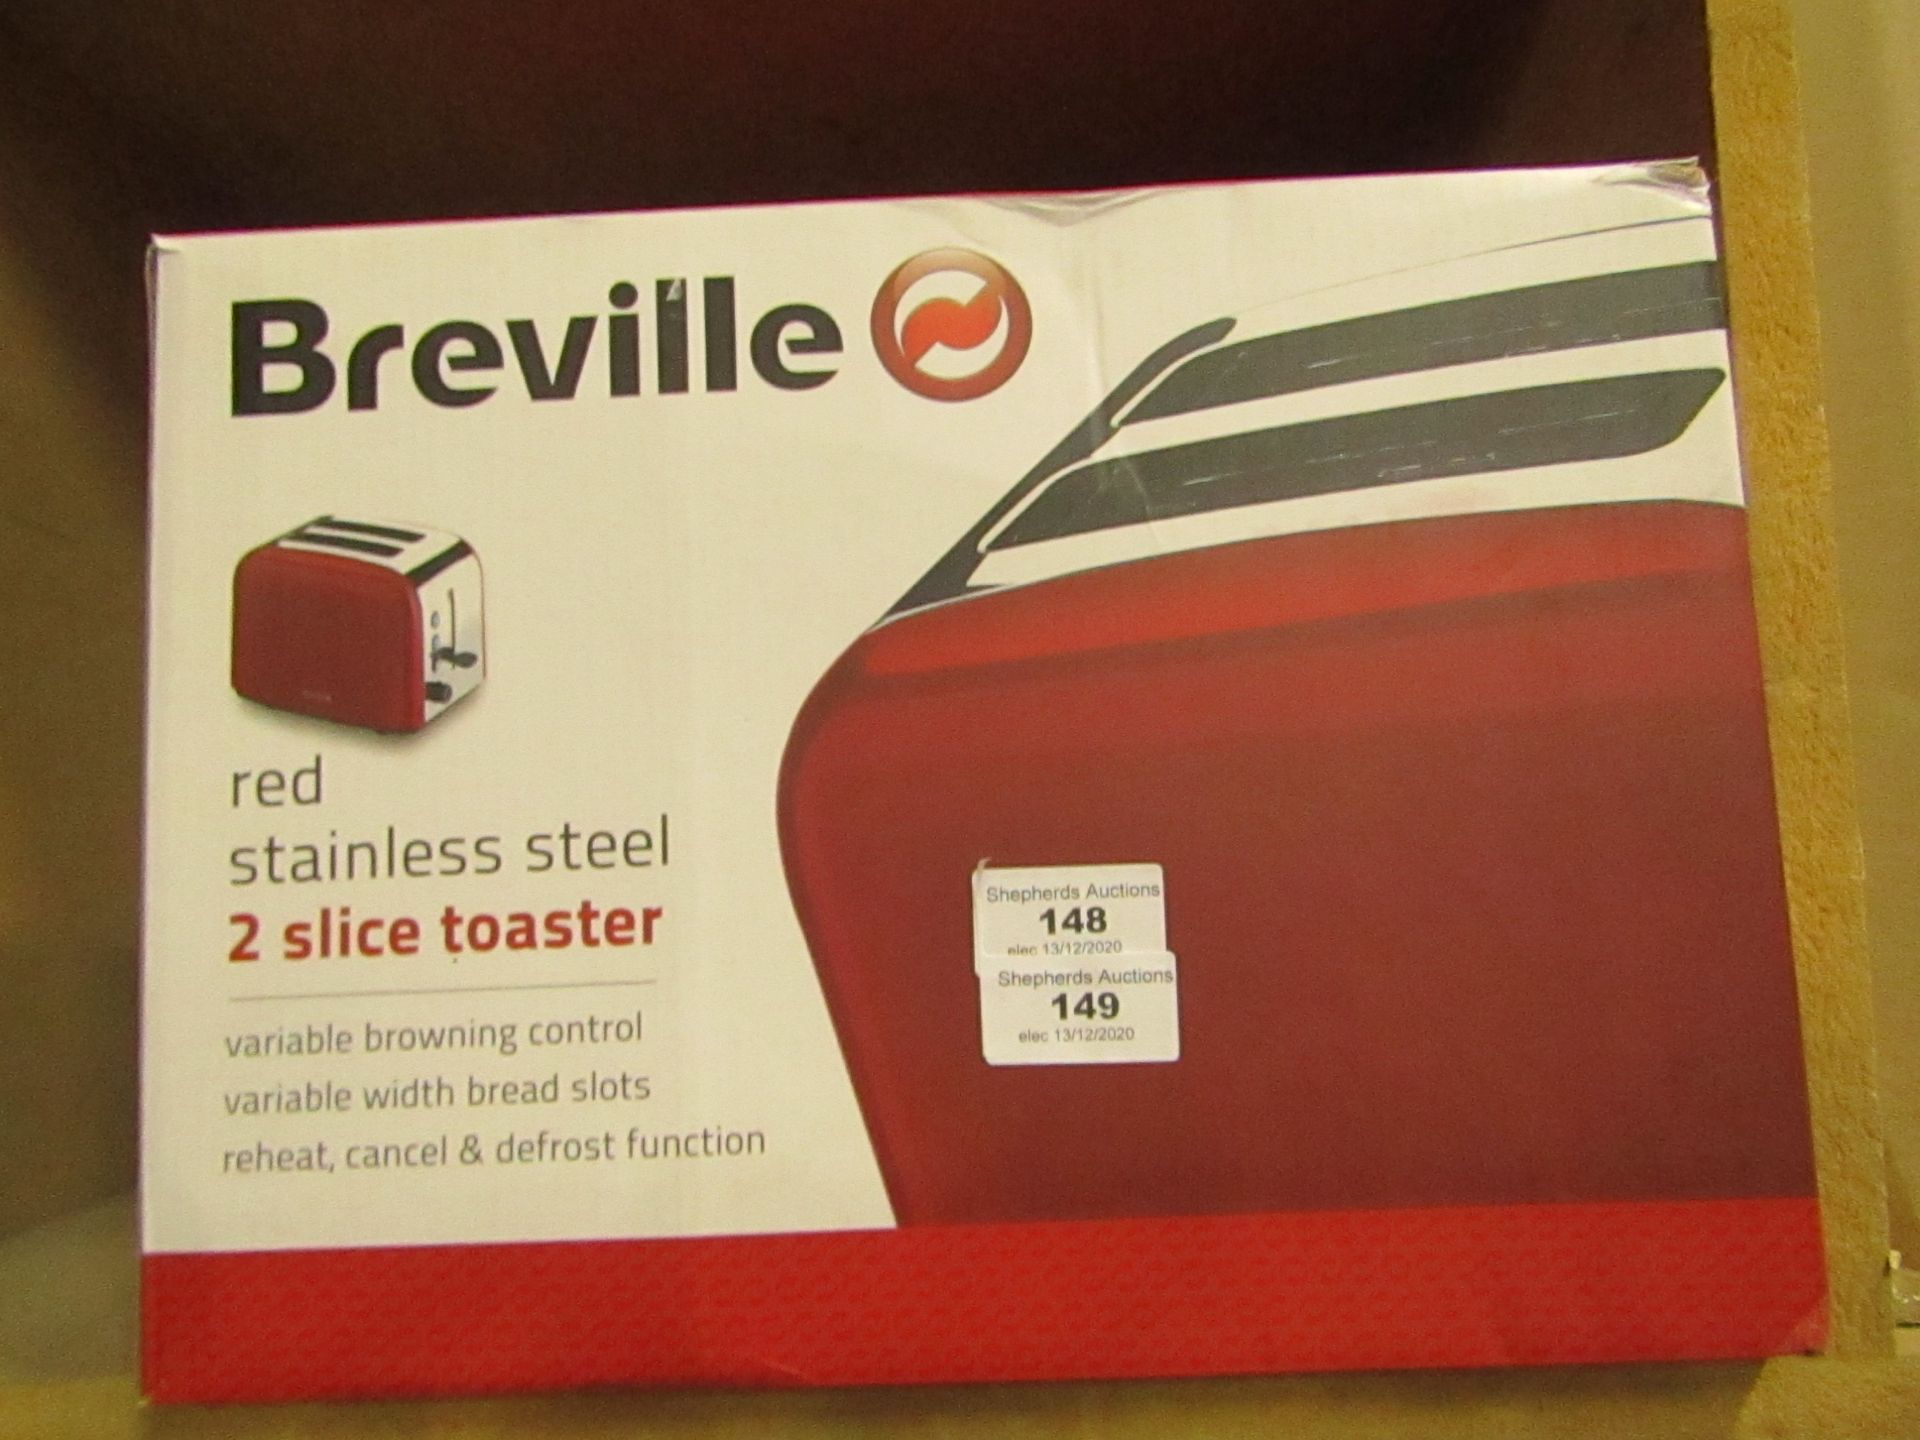 Breville red stainless steel 2 slice toaster - Unchecked & Boxed